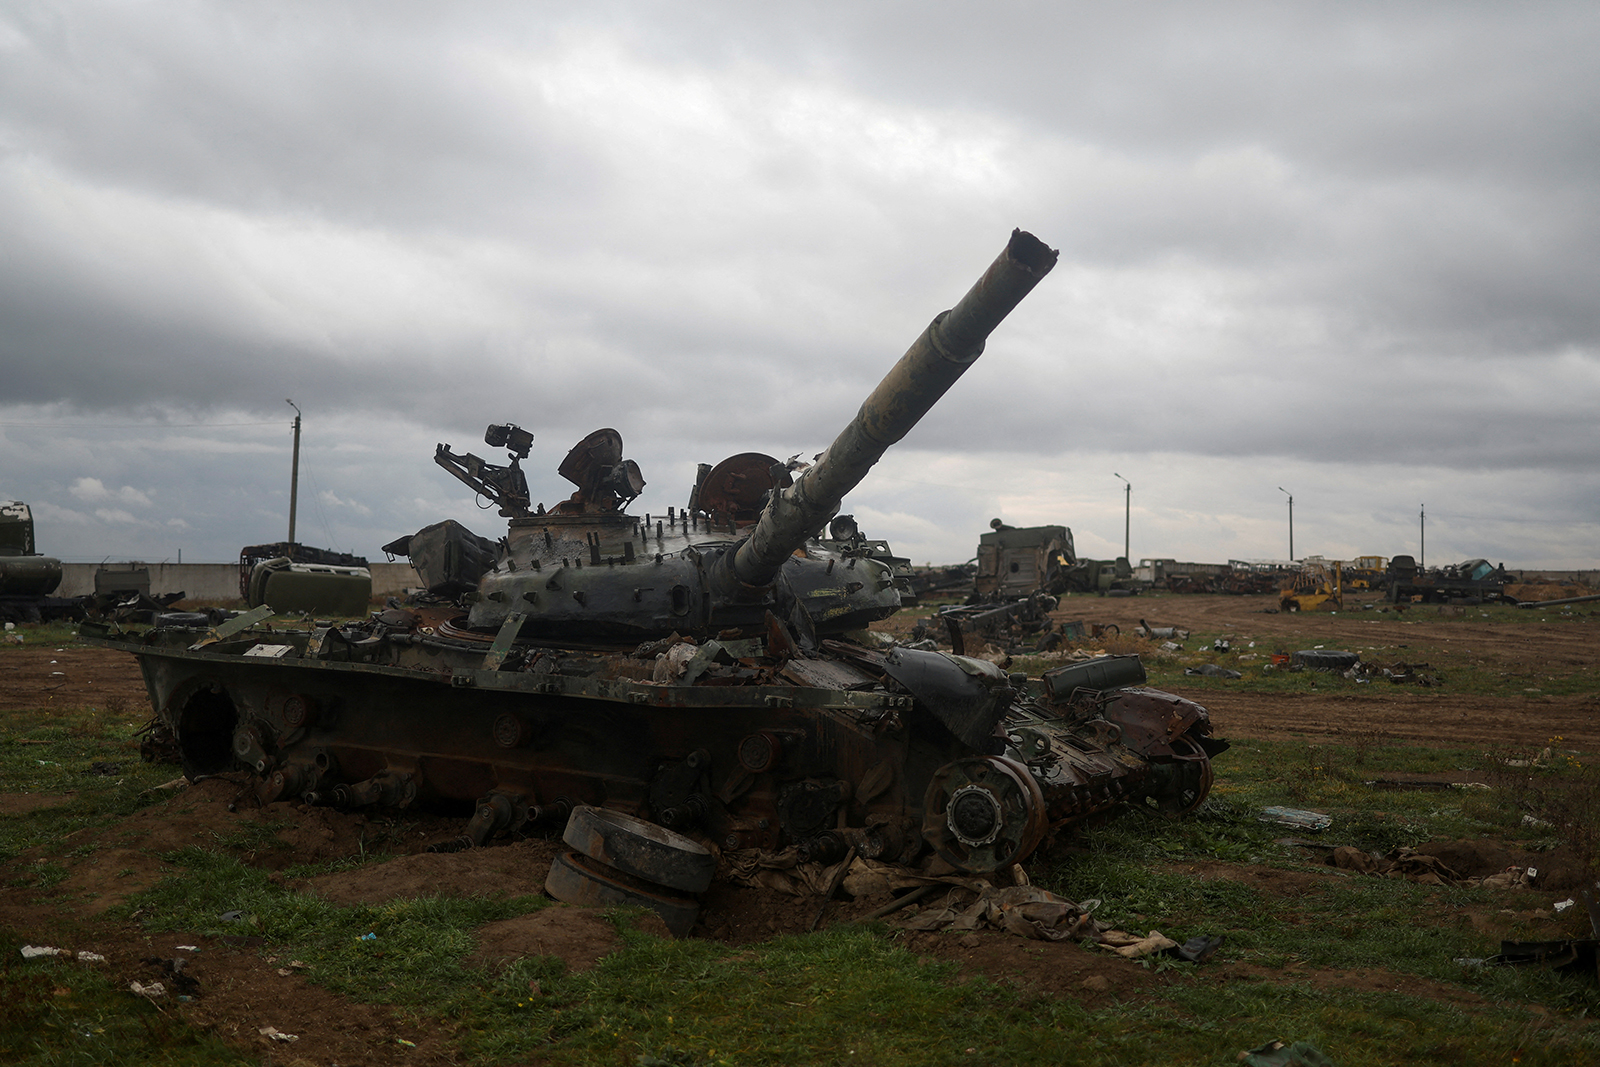 A destroyed Russian tank is seen in Chornobaivka, outside of Kherson, Ukraine on November 16, 2022.